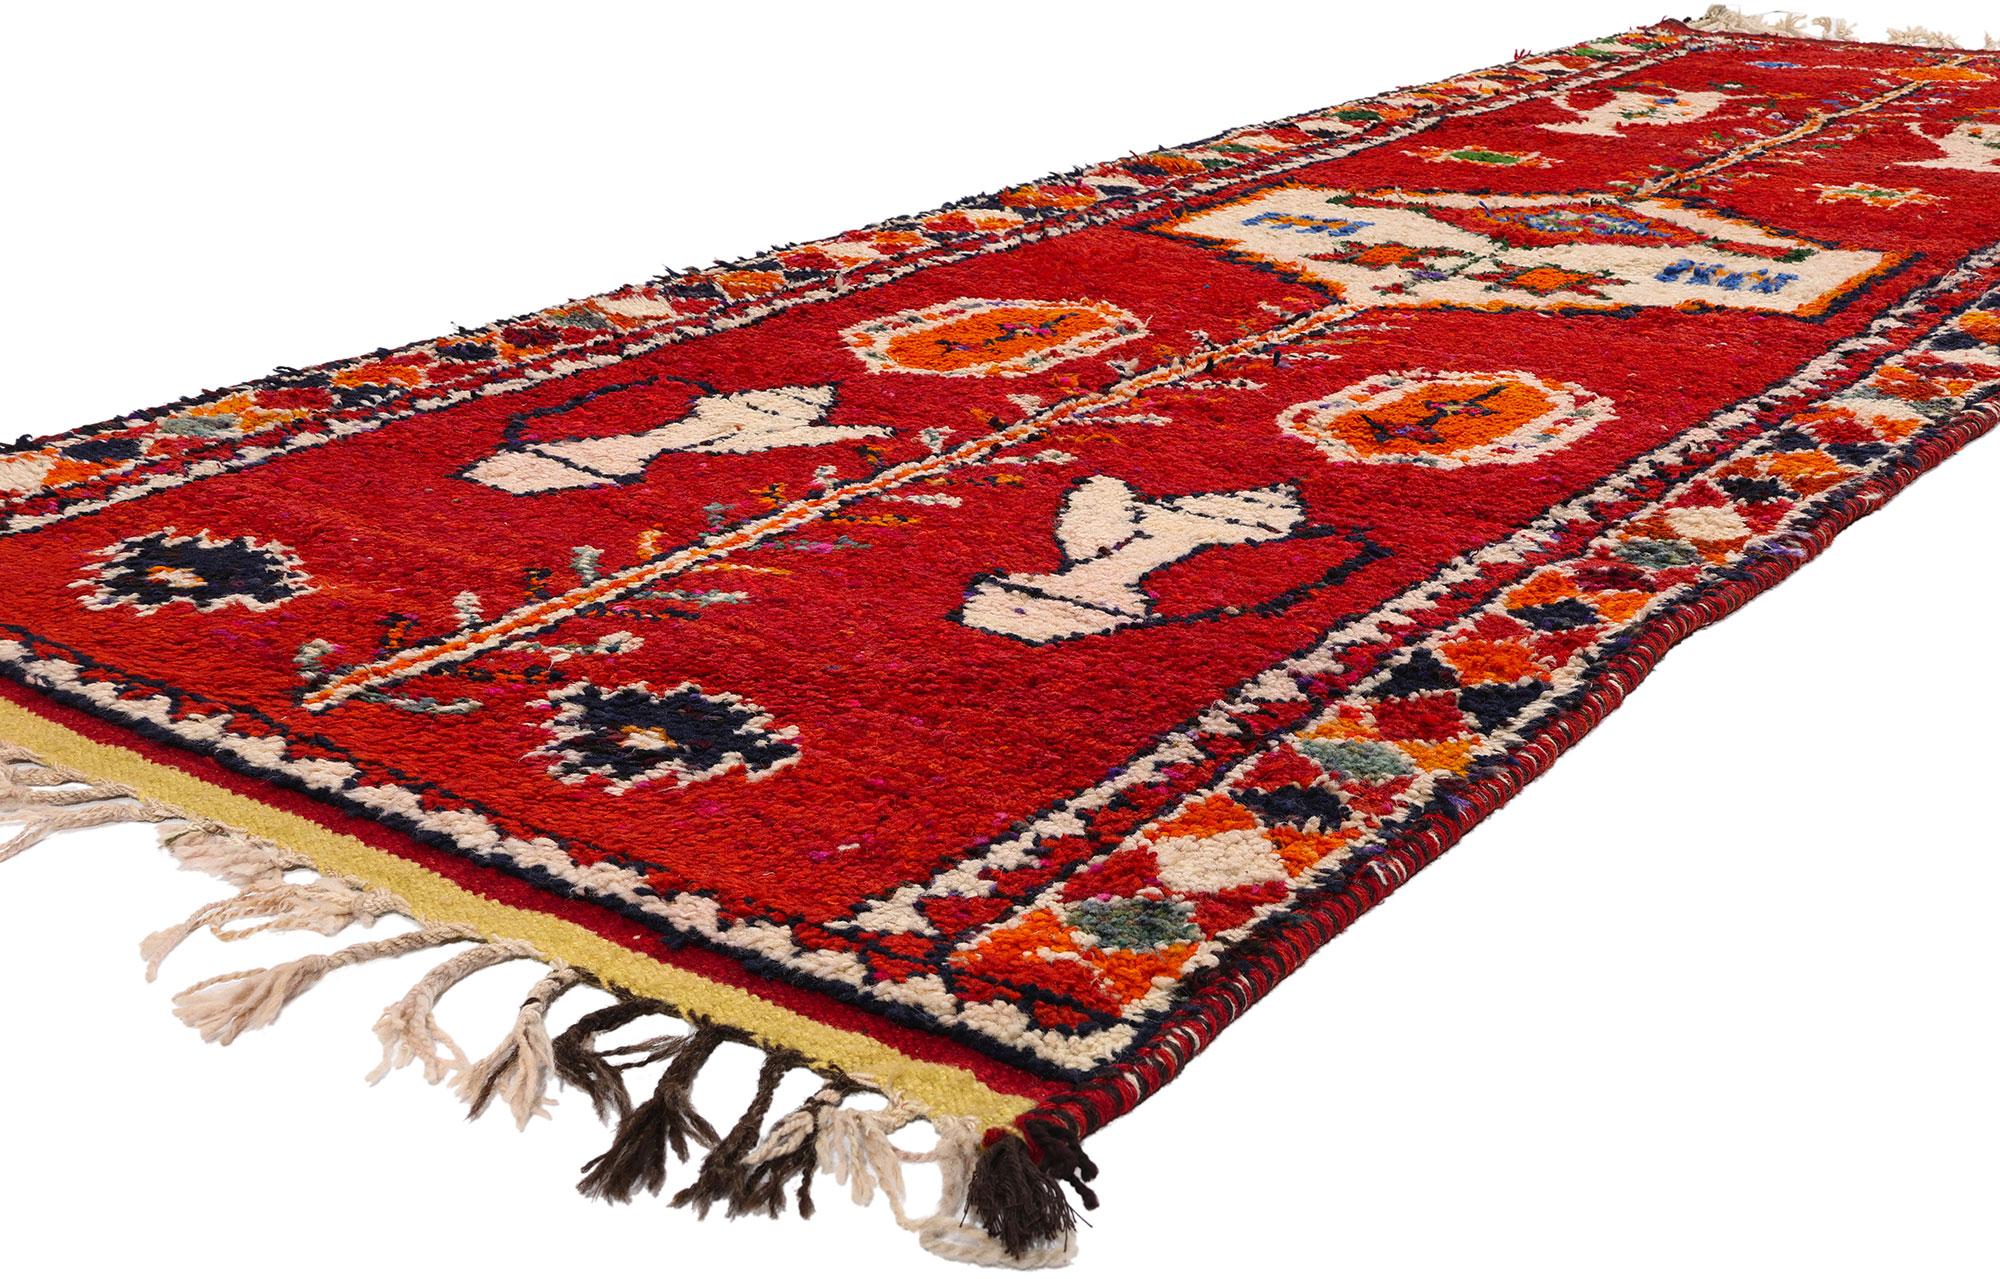 53905 Vintage Red Kurdish Rug Runner, 03'04 x 11'01. Crafted with meticulous precision and unwavering dedication by Kurdish Herki tribes in eastern Turkey, particularly in the Hakkari province, Kurdish rugs are esteemed for their unique geometric